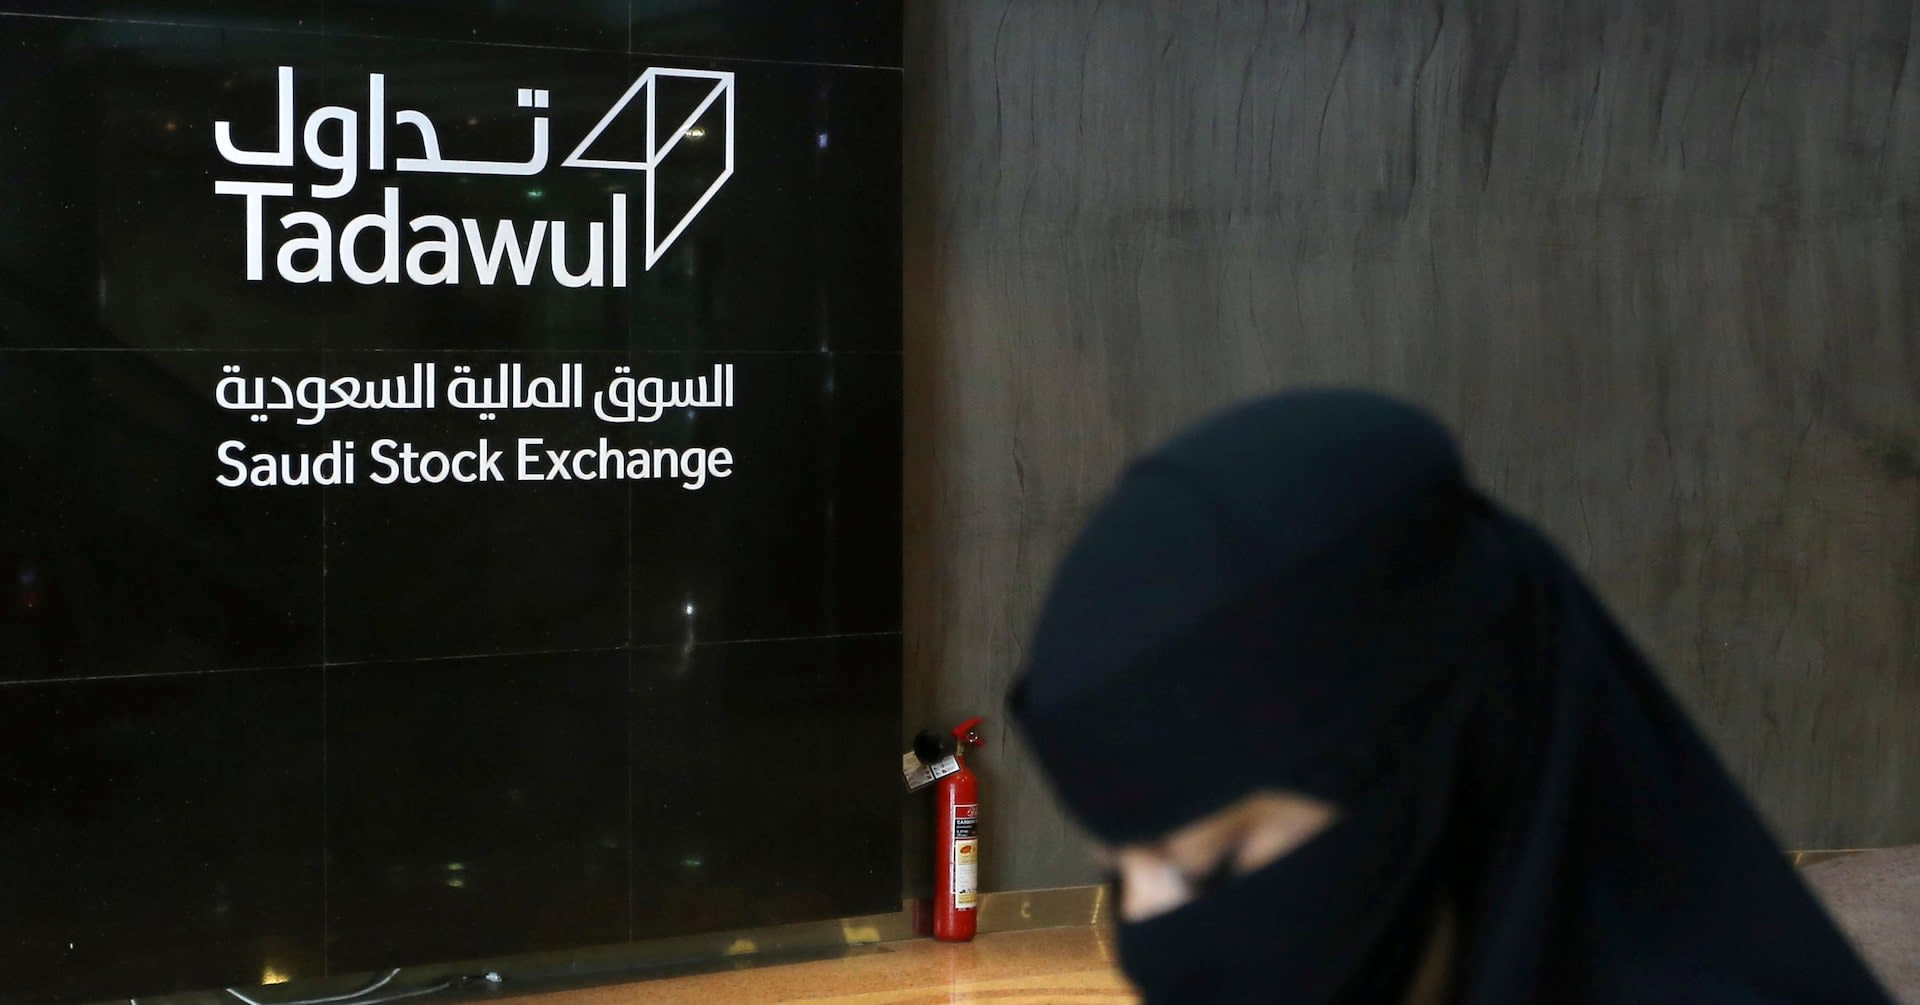 Saudi bourse gains on US rate cut hopes, Egypt stocks fall after Gaza attack